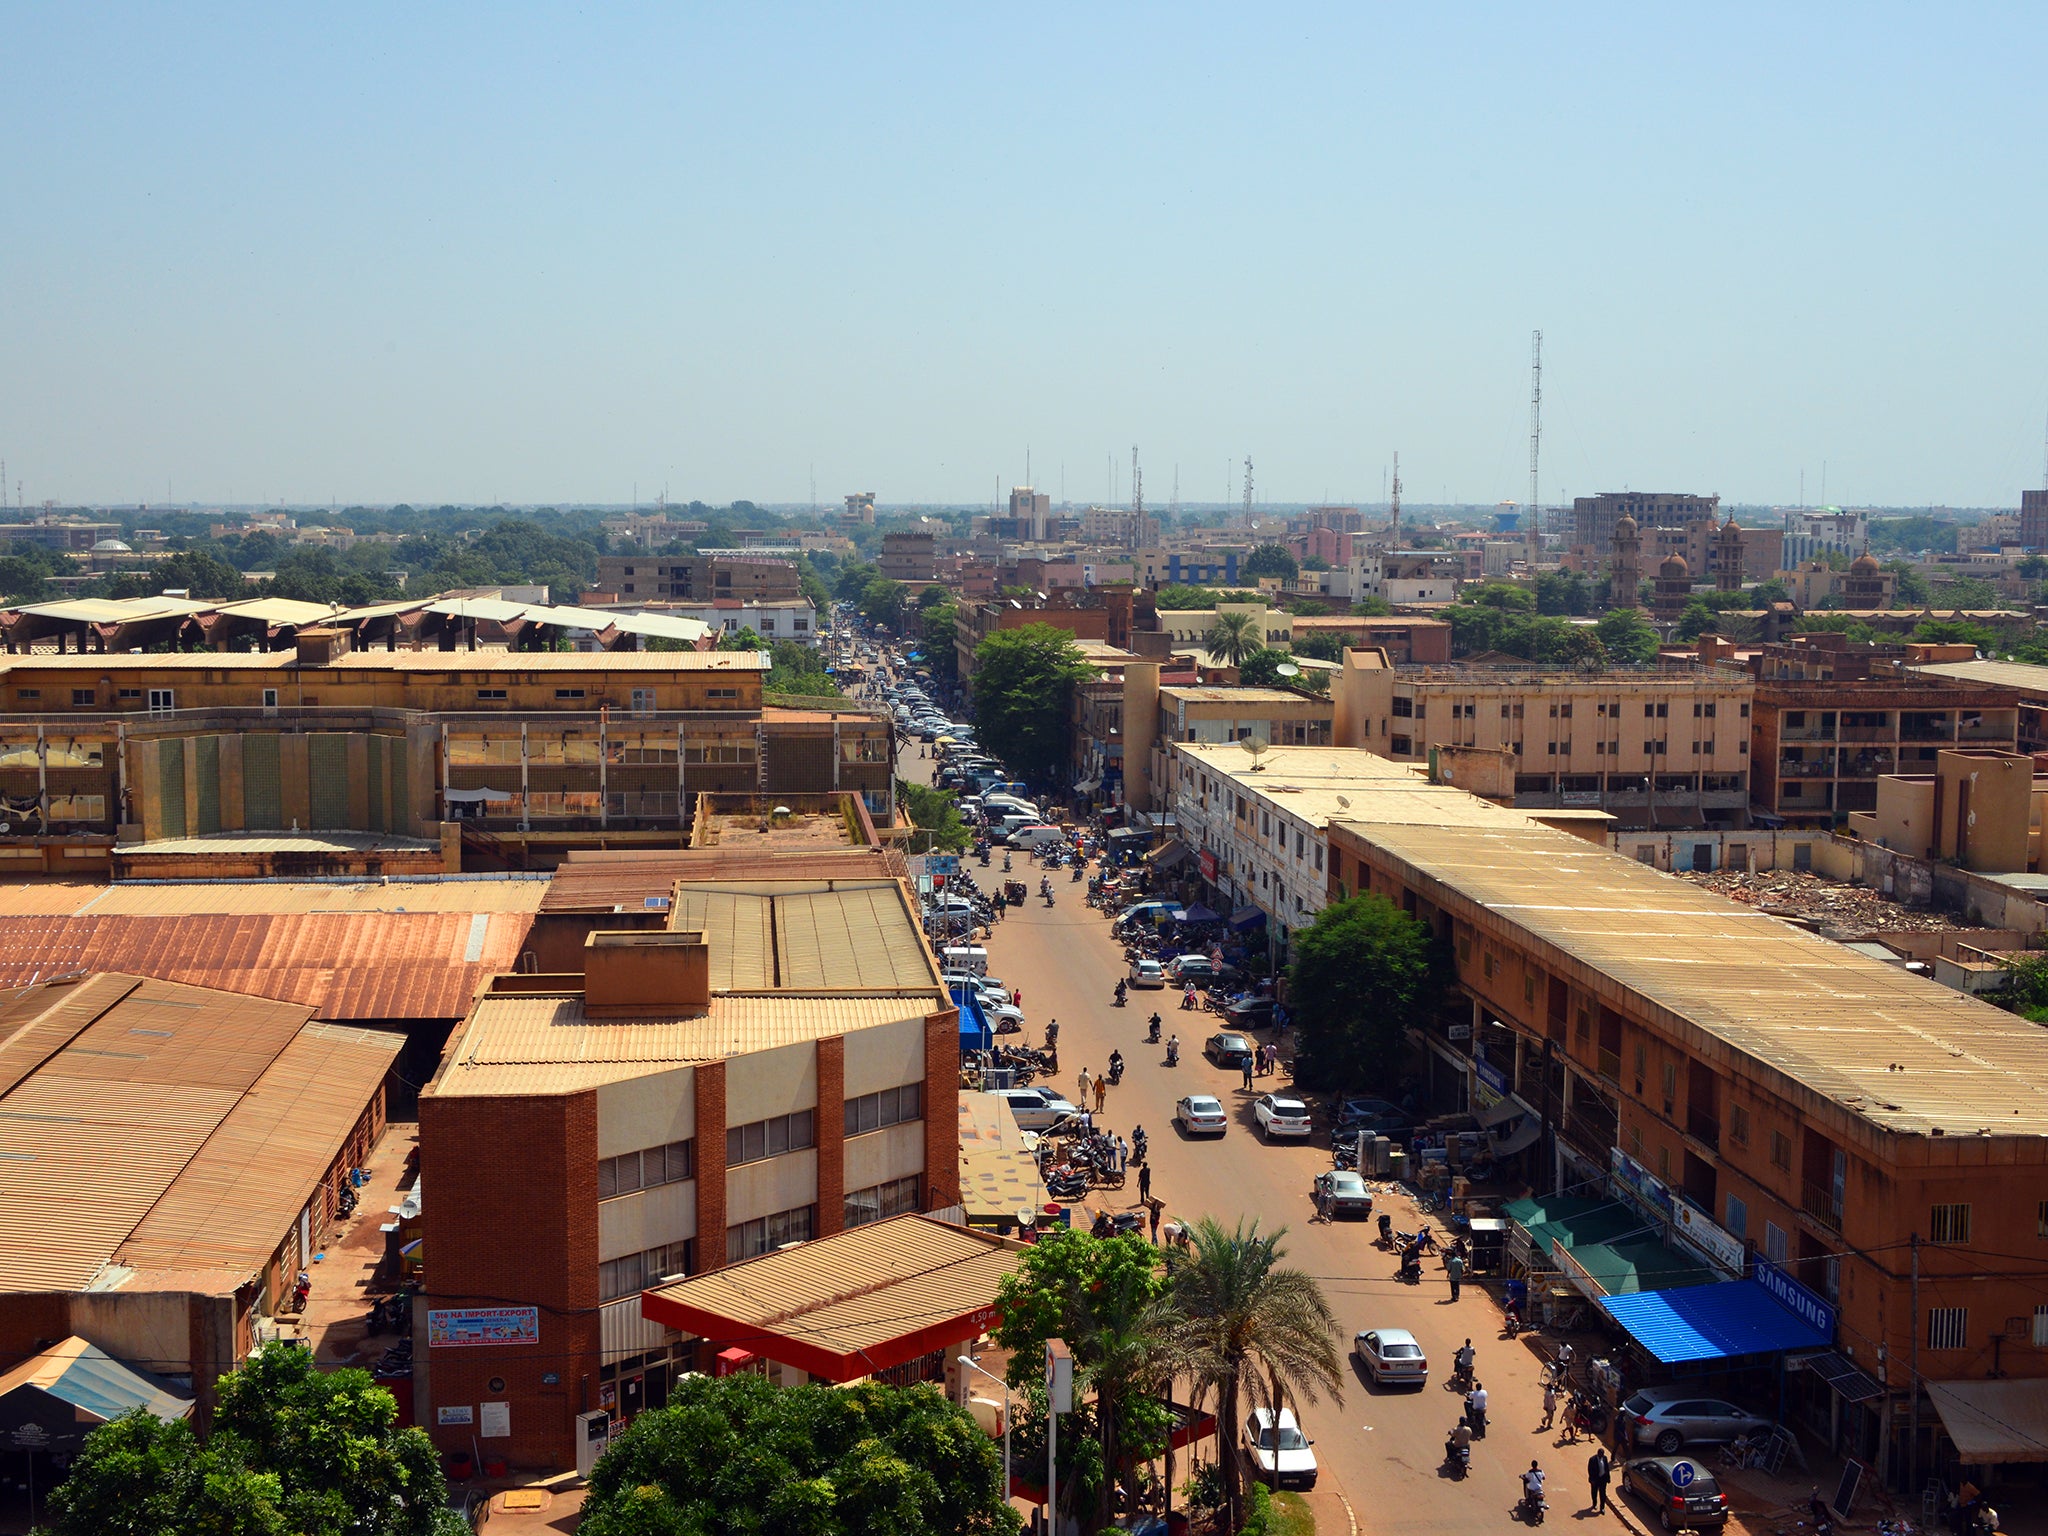 The banned procedure was carried out on girls and young women in Ouagadougou, the country's capital